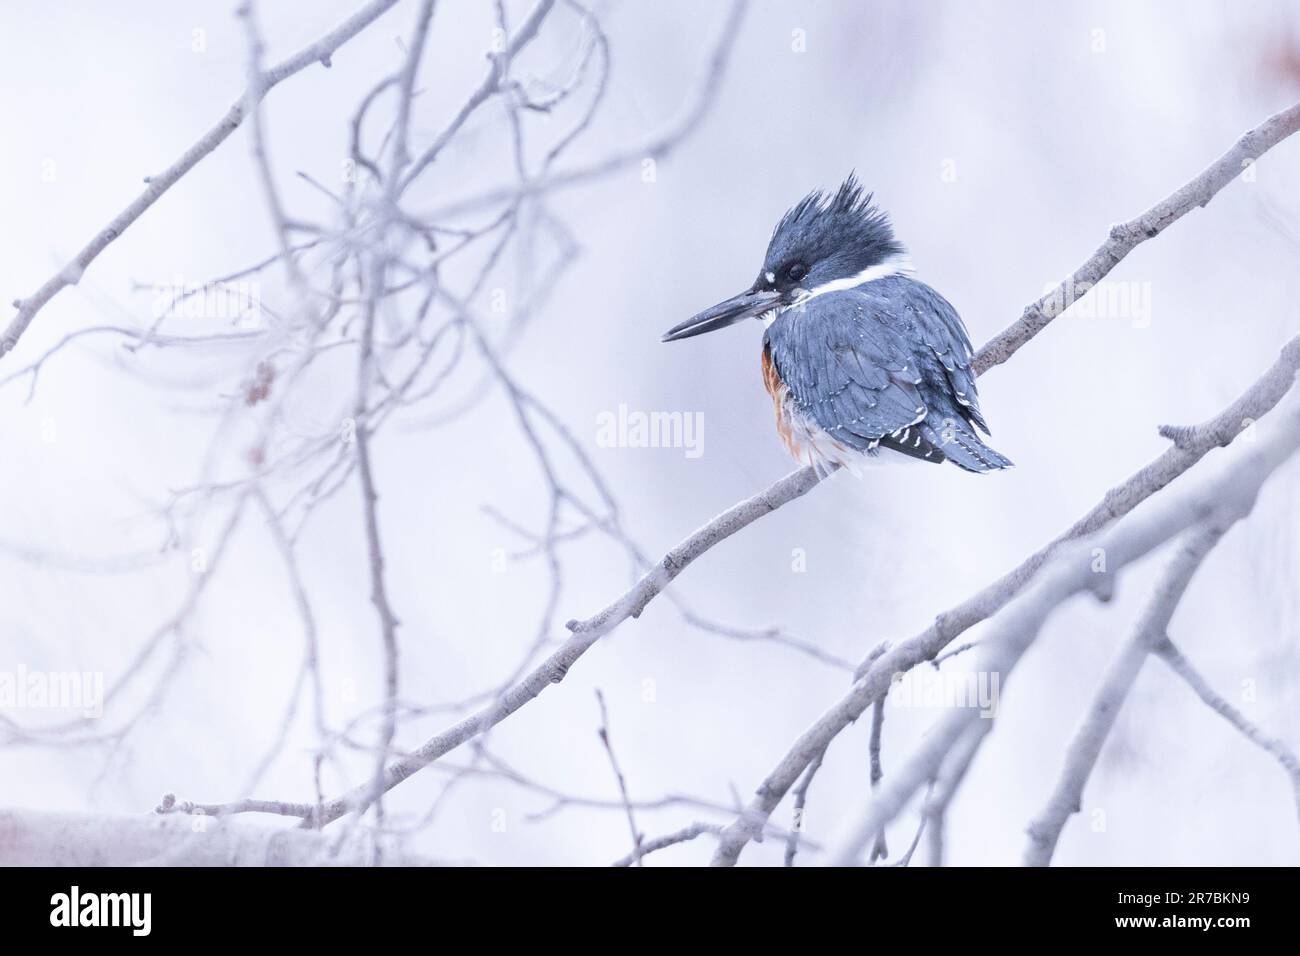 A vibrant Belted Kingfisher perched on a delicate tree branch covered by snow Stock Photo